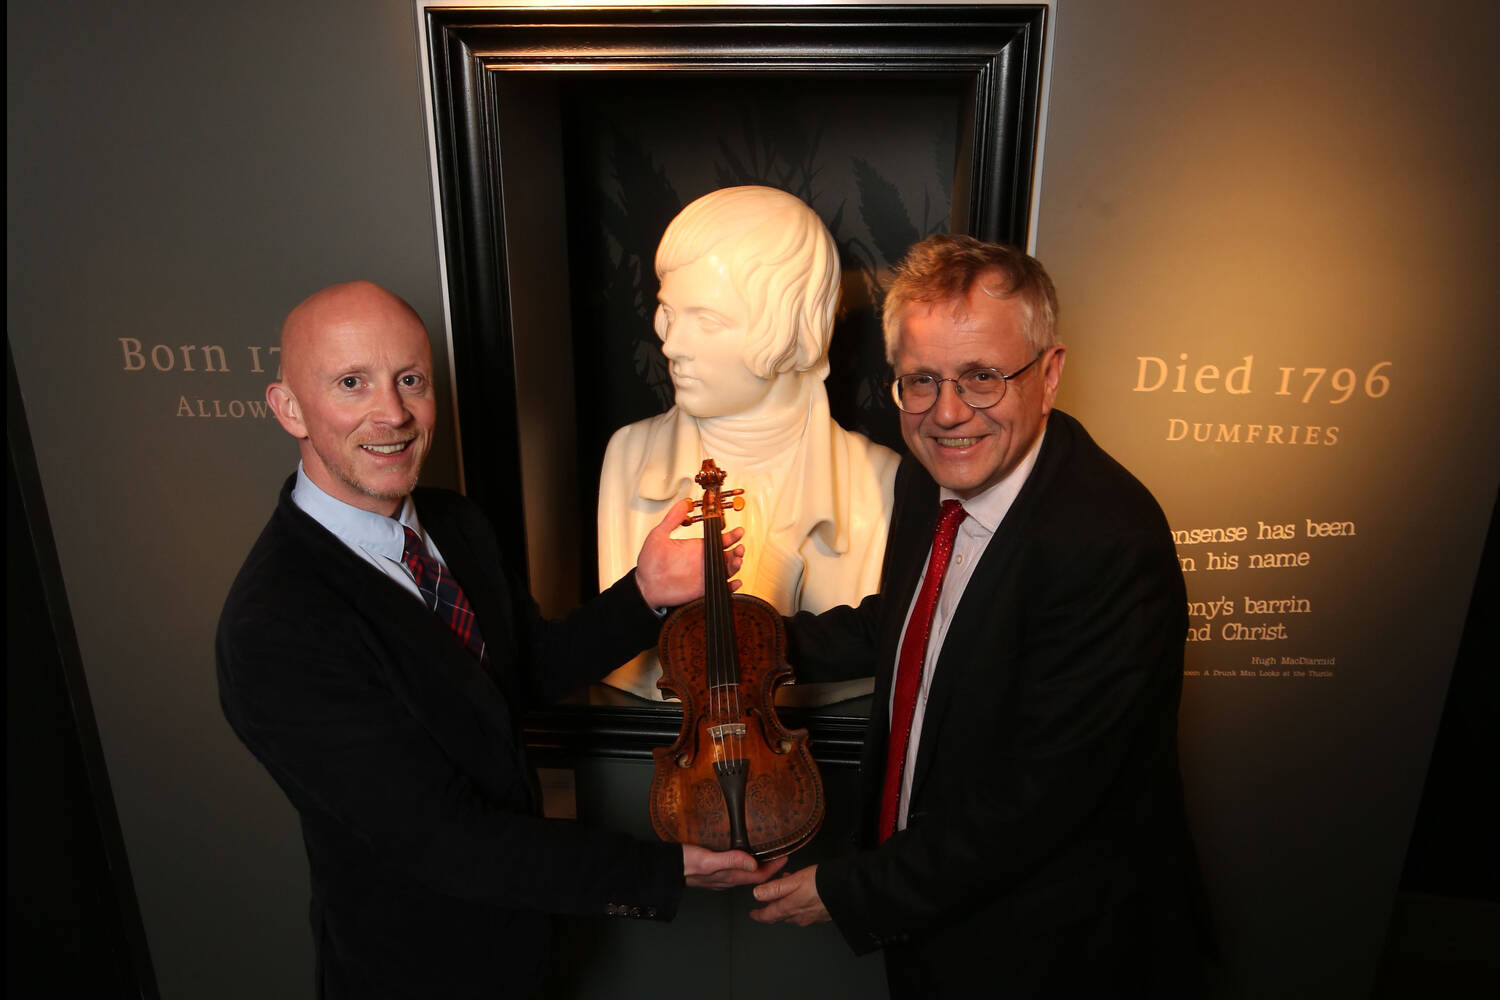 Two men hold the Burns violin between them, standing in front of a bust of Burns.